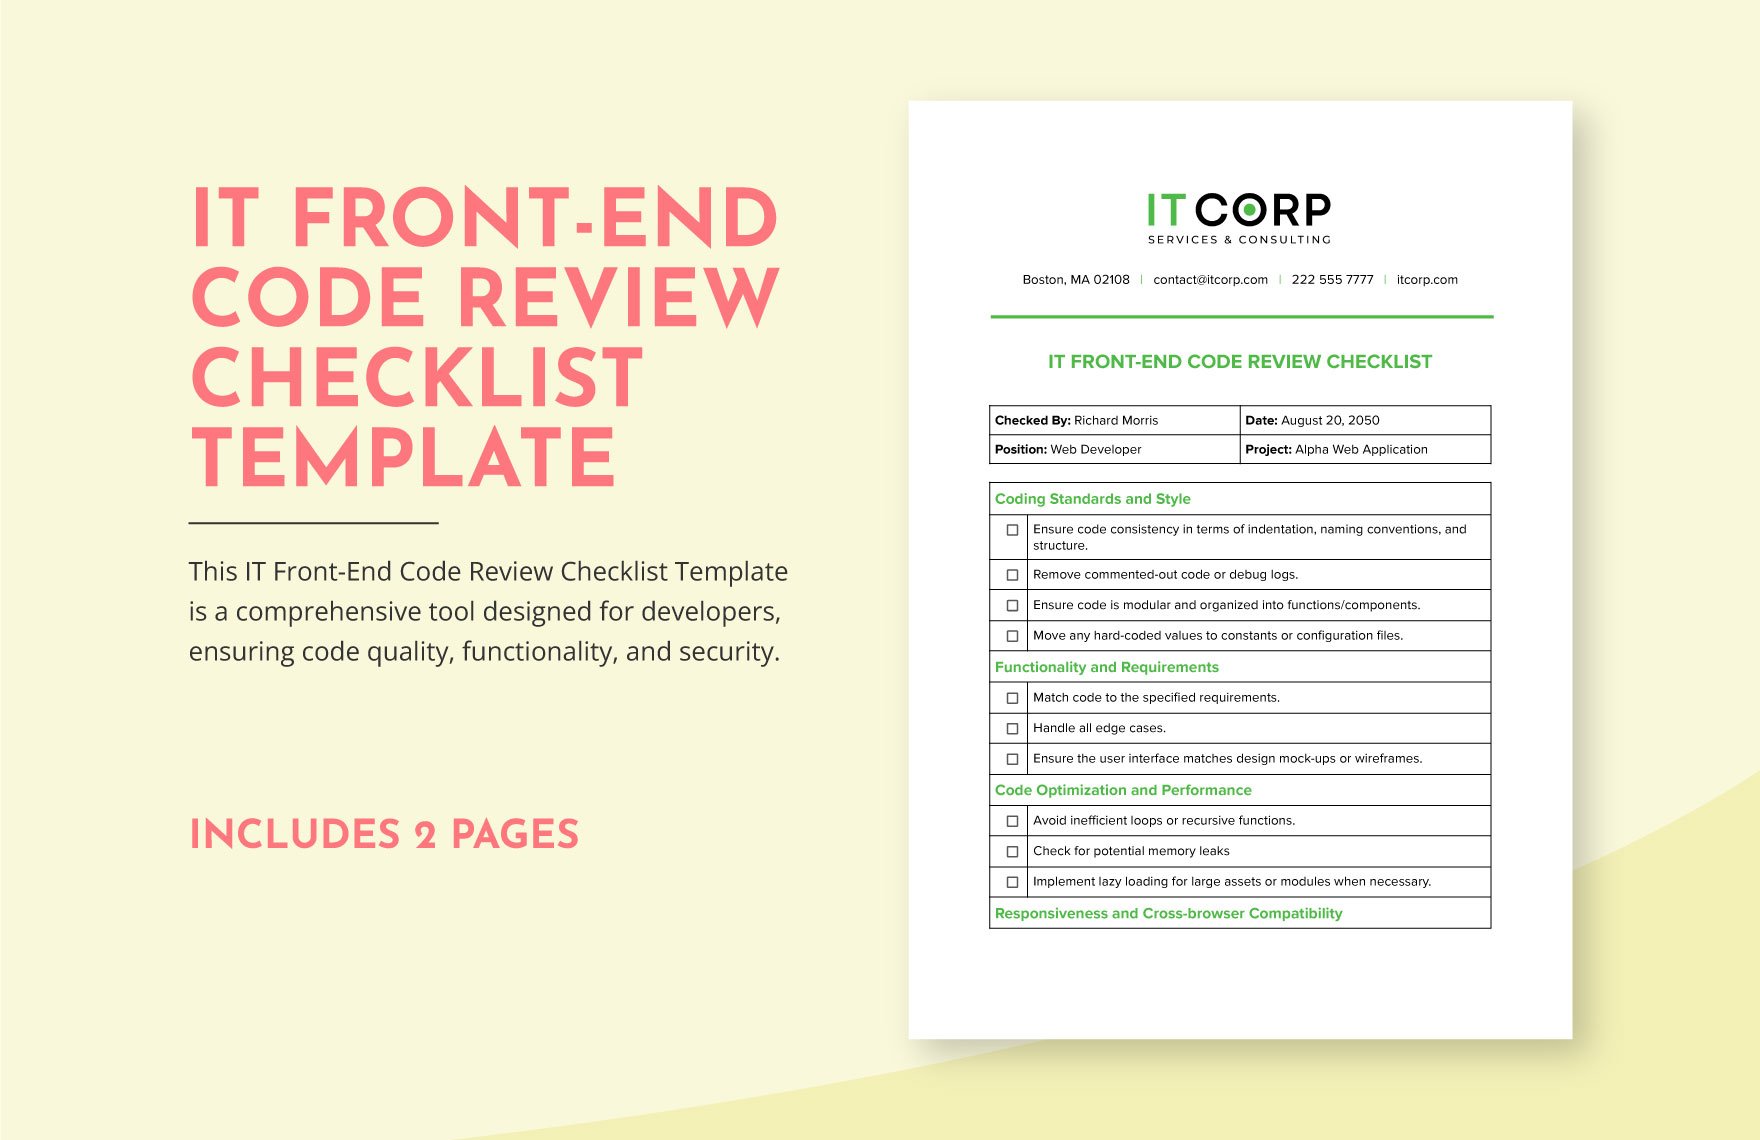 IT Front-End Code Review Checklist Template